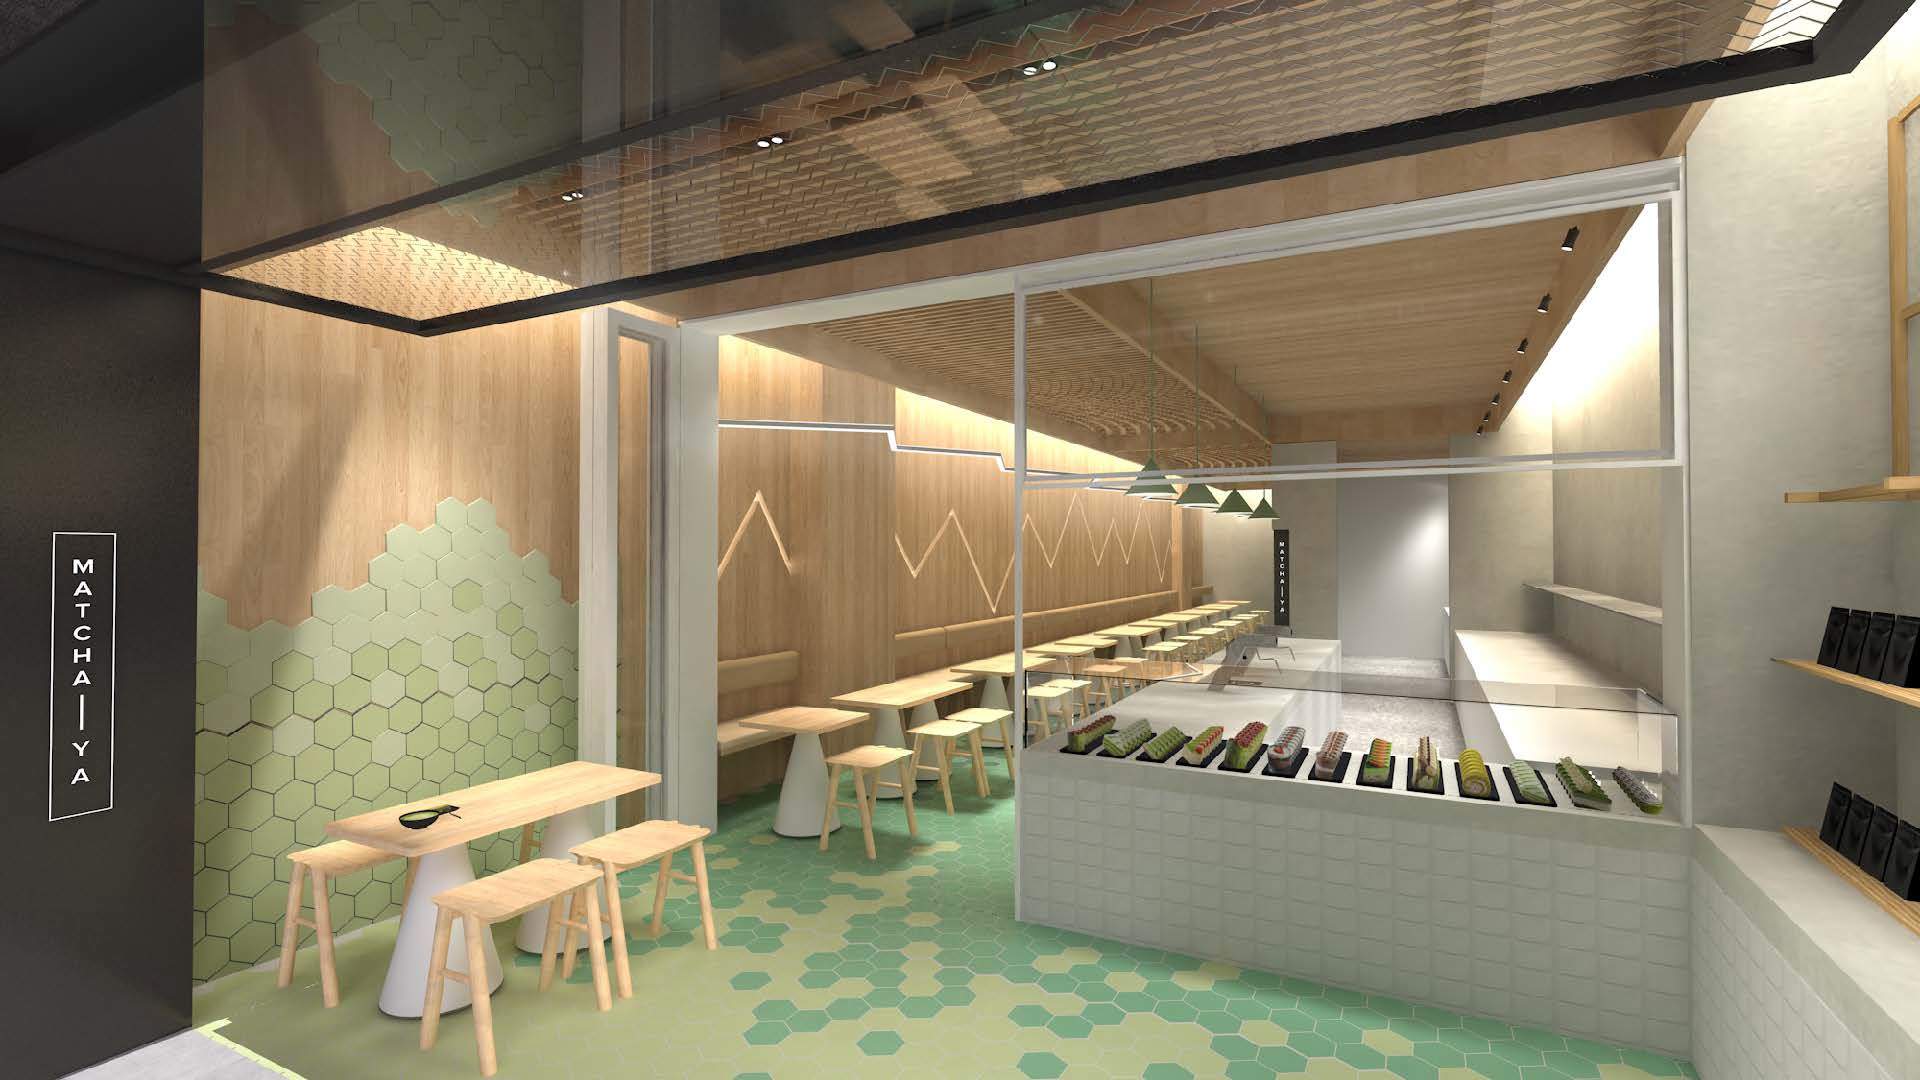 Five New Eateries Have Been Added to Haymarket's Soon-to-Open Steam Mill Lane